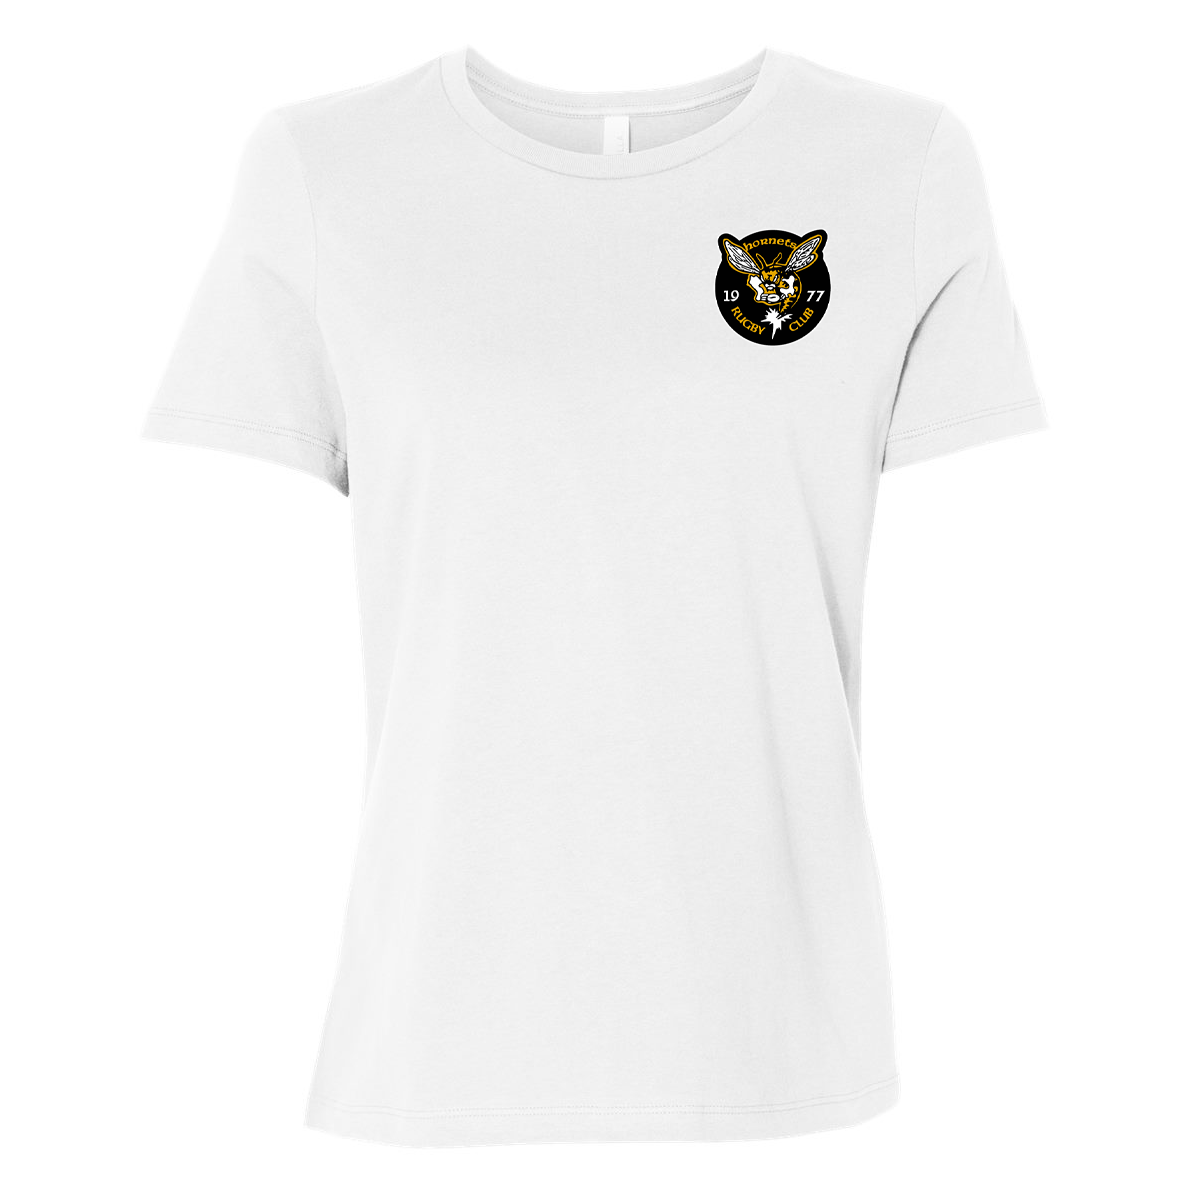 St. Louis Hornets Rugby Club Women's Relaxed Fit Tee